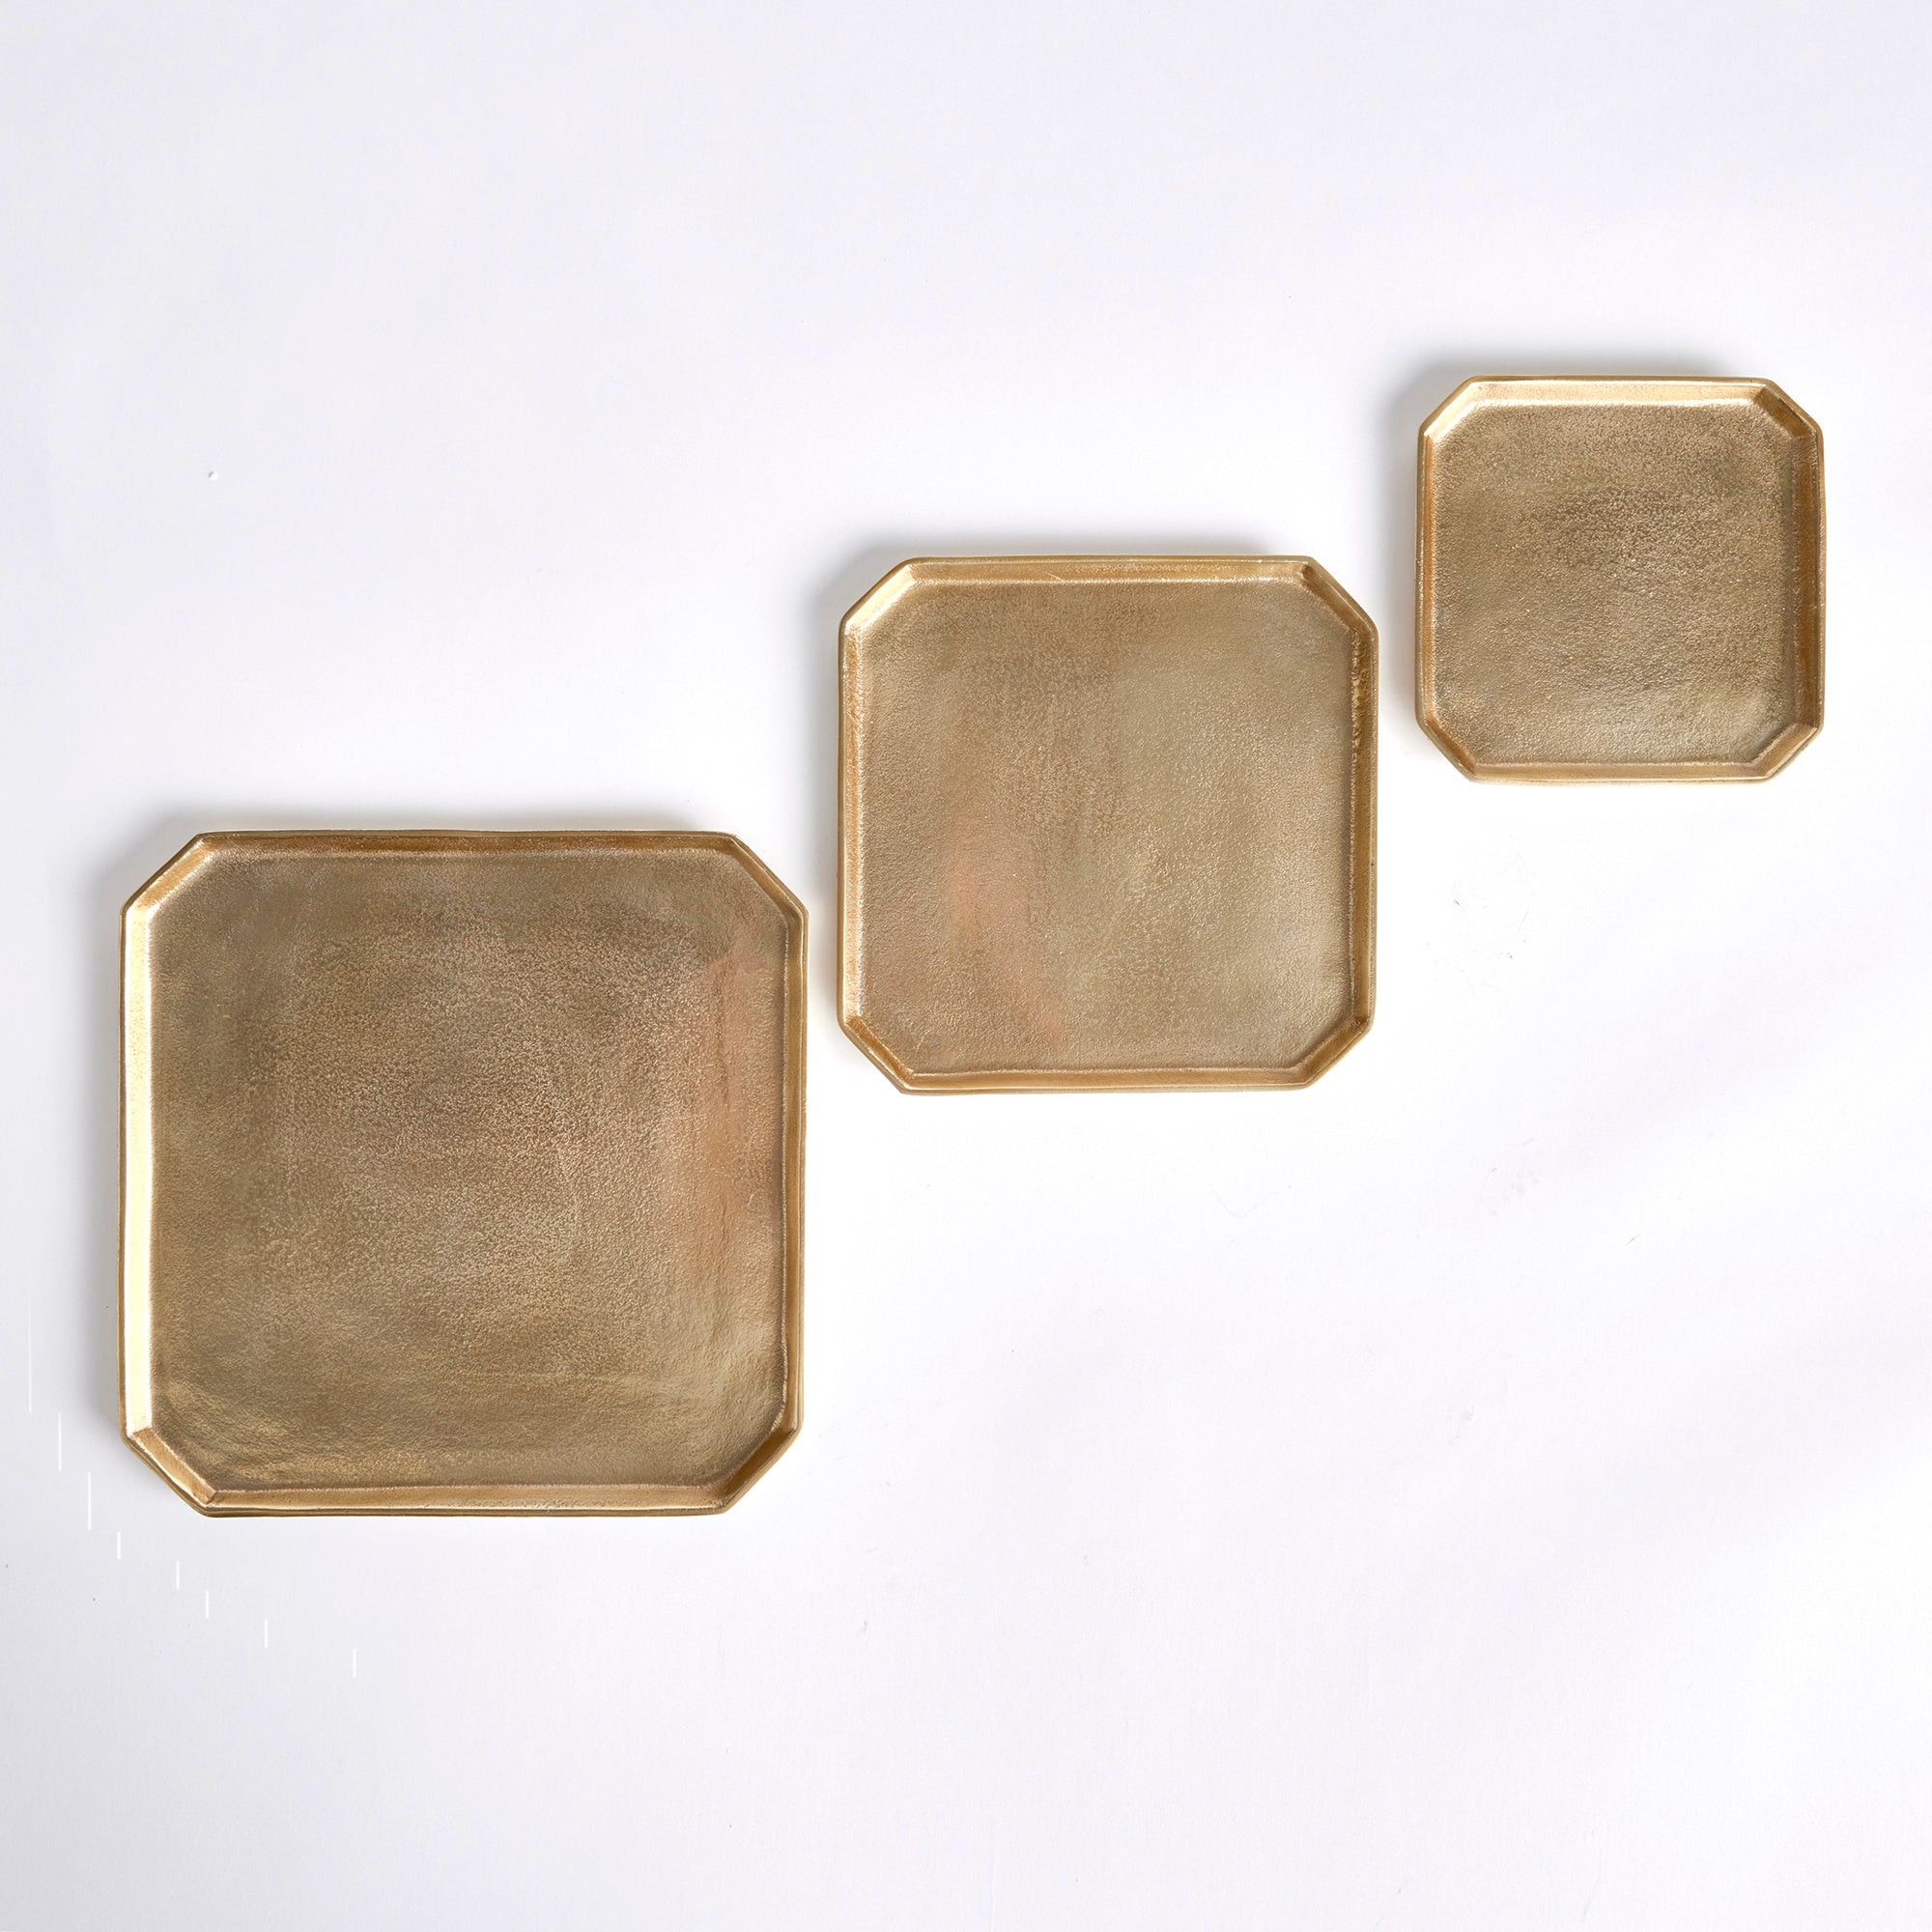 A geometric shape and sleek look make these cast aluminum trays unique. Line with a collection of candles for a golden, contemporary touch. They are dry food safe, so serve your favorite muffins or rolls in style at your next gathering. Amethyst Home provides interior design, new construction, custom furniture, and area rugs in the Winter Garden metro area.